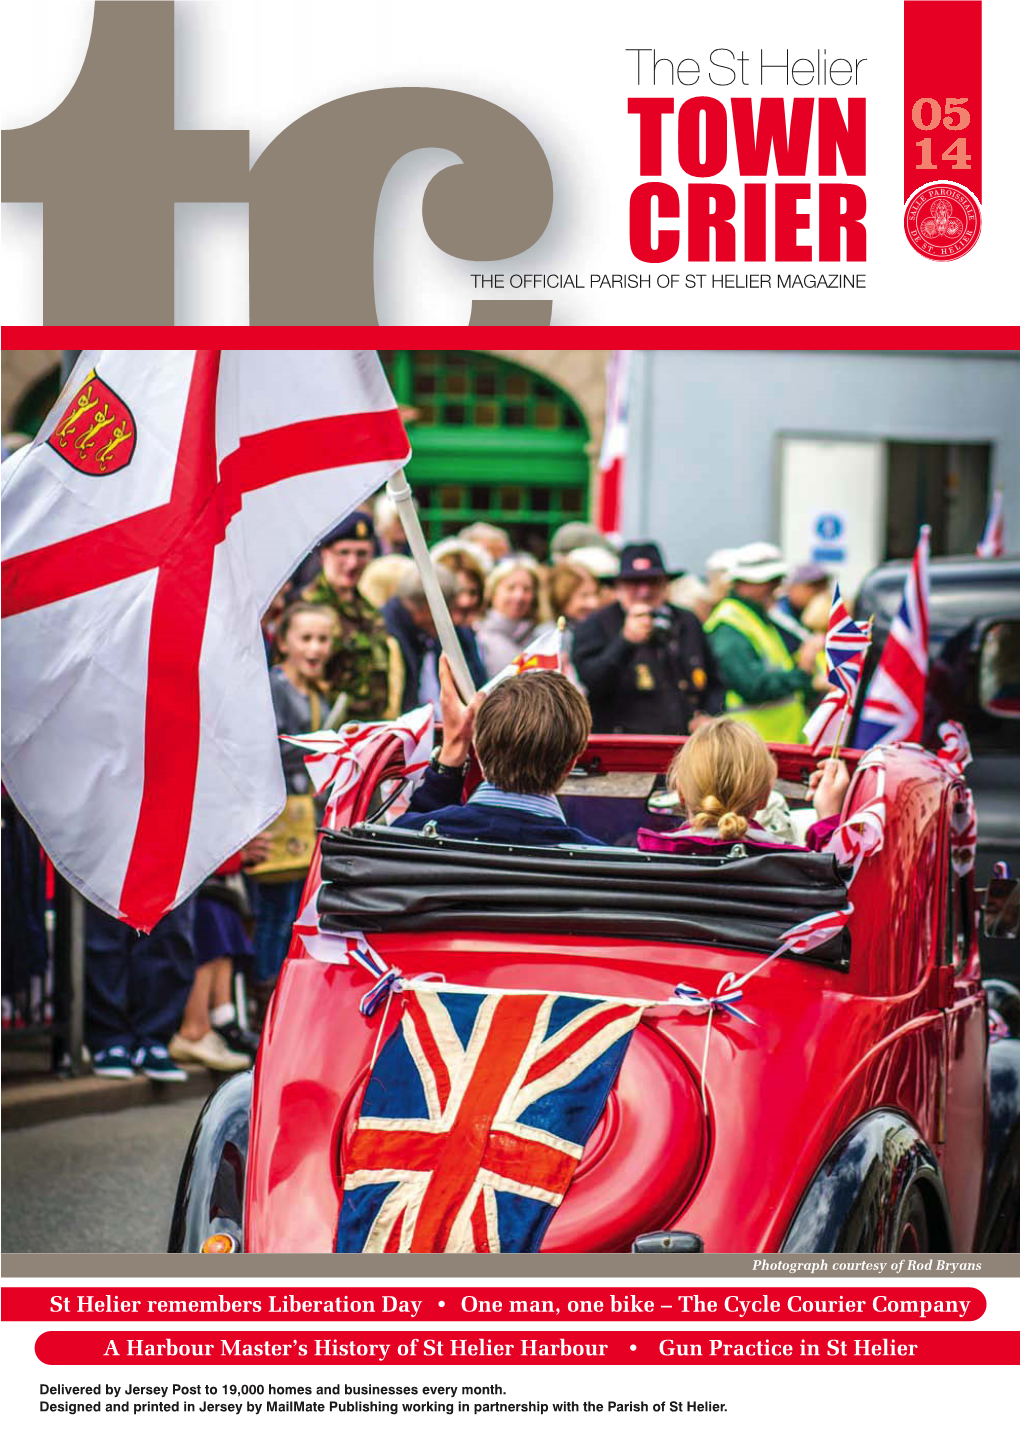 Town Crier with Its Wliberation Theme, and Contents Cover Photograph Kindly Supplied Respect, Compassion and Trust 4 by Deputy Rod Bryans